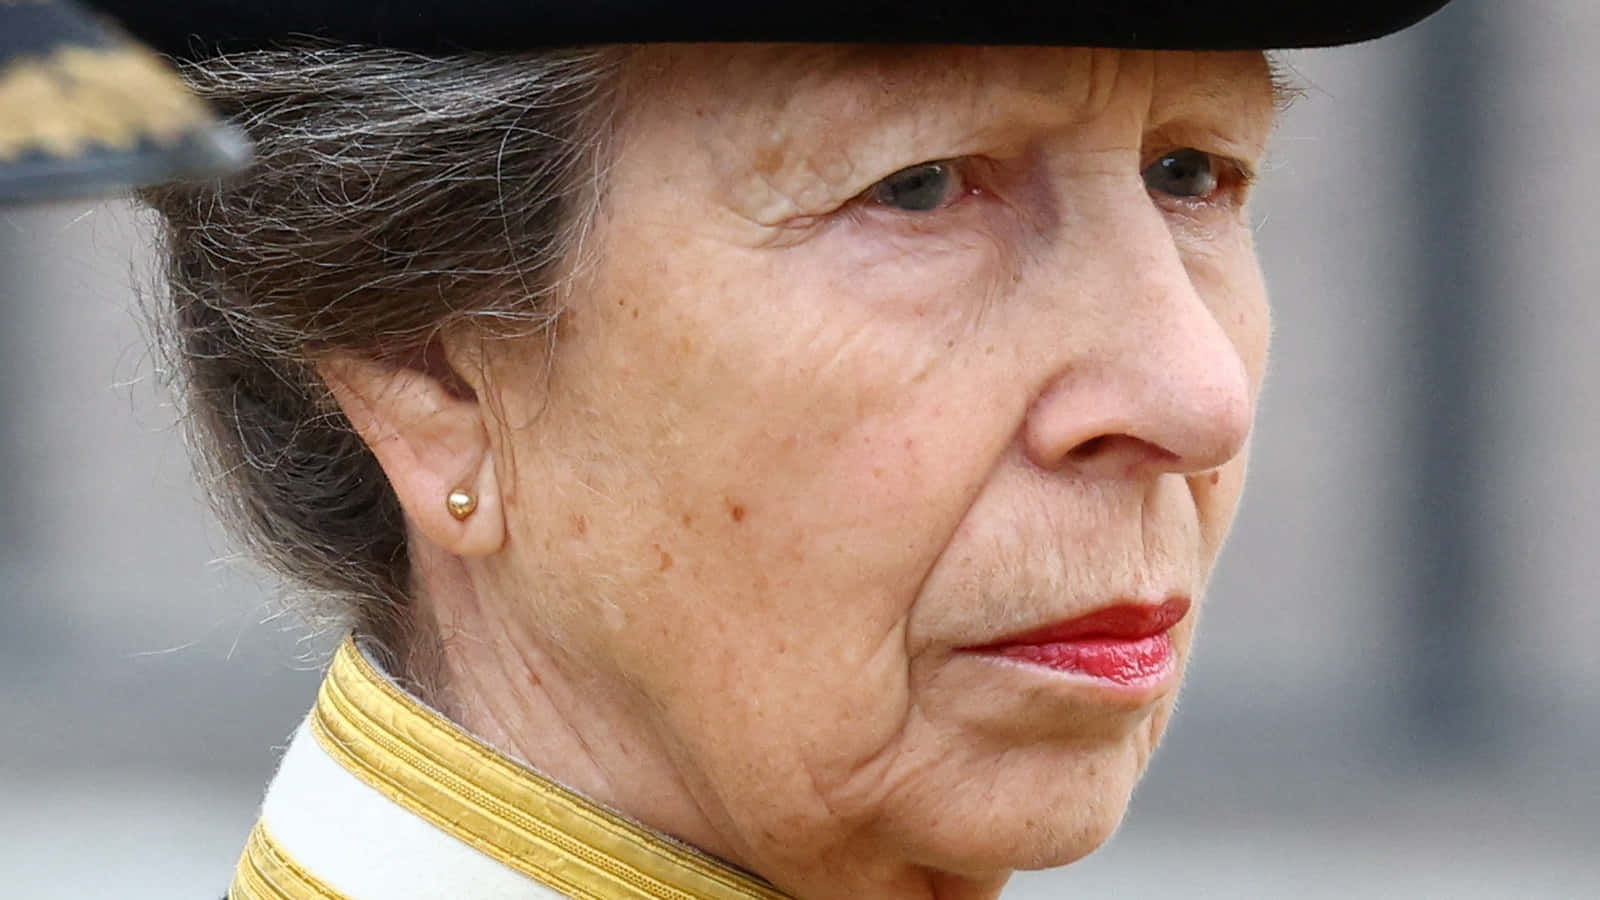 Princess Anne During The Funeral Procession Wallpaper